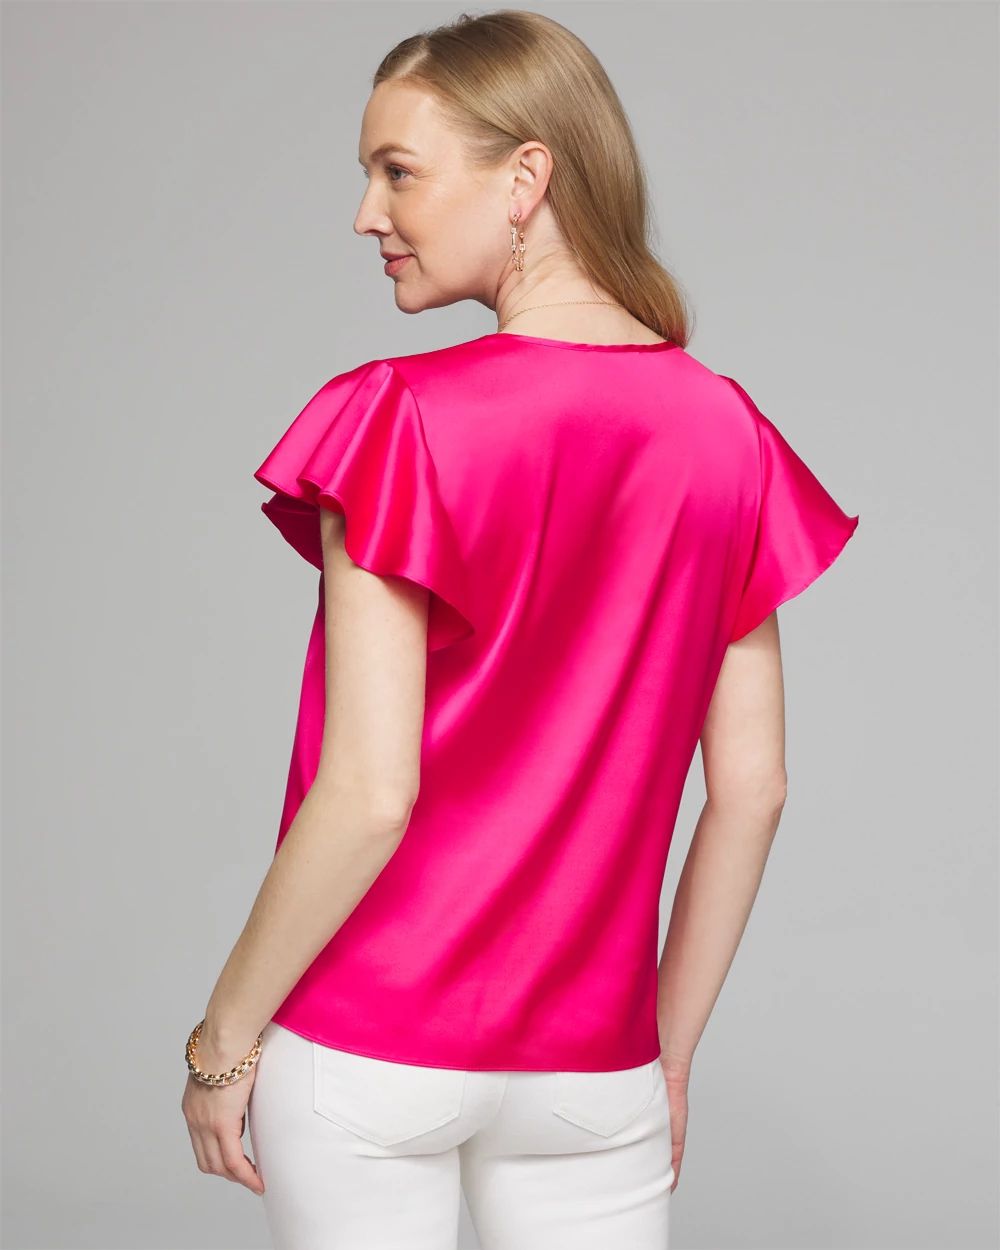 Outlet WHBM Satin Flounce Sleeve Top click to view larger image.